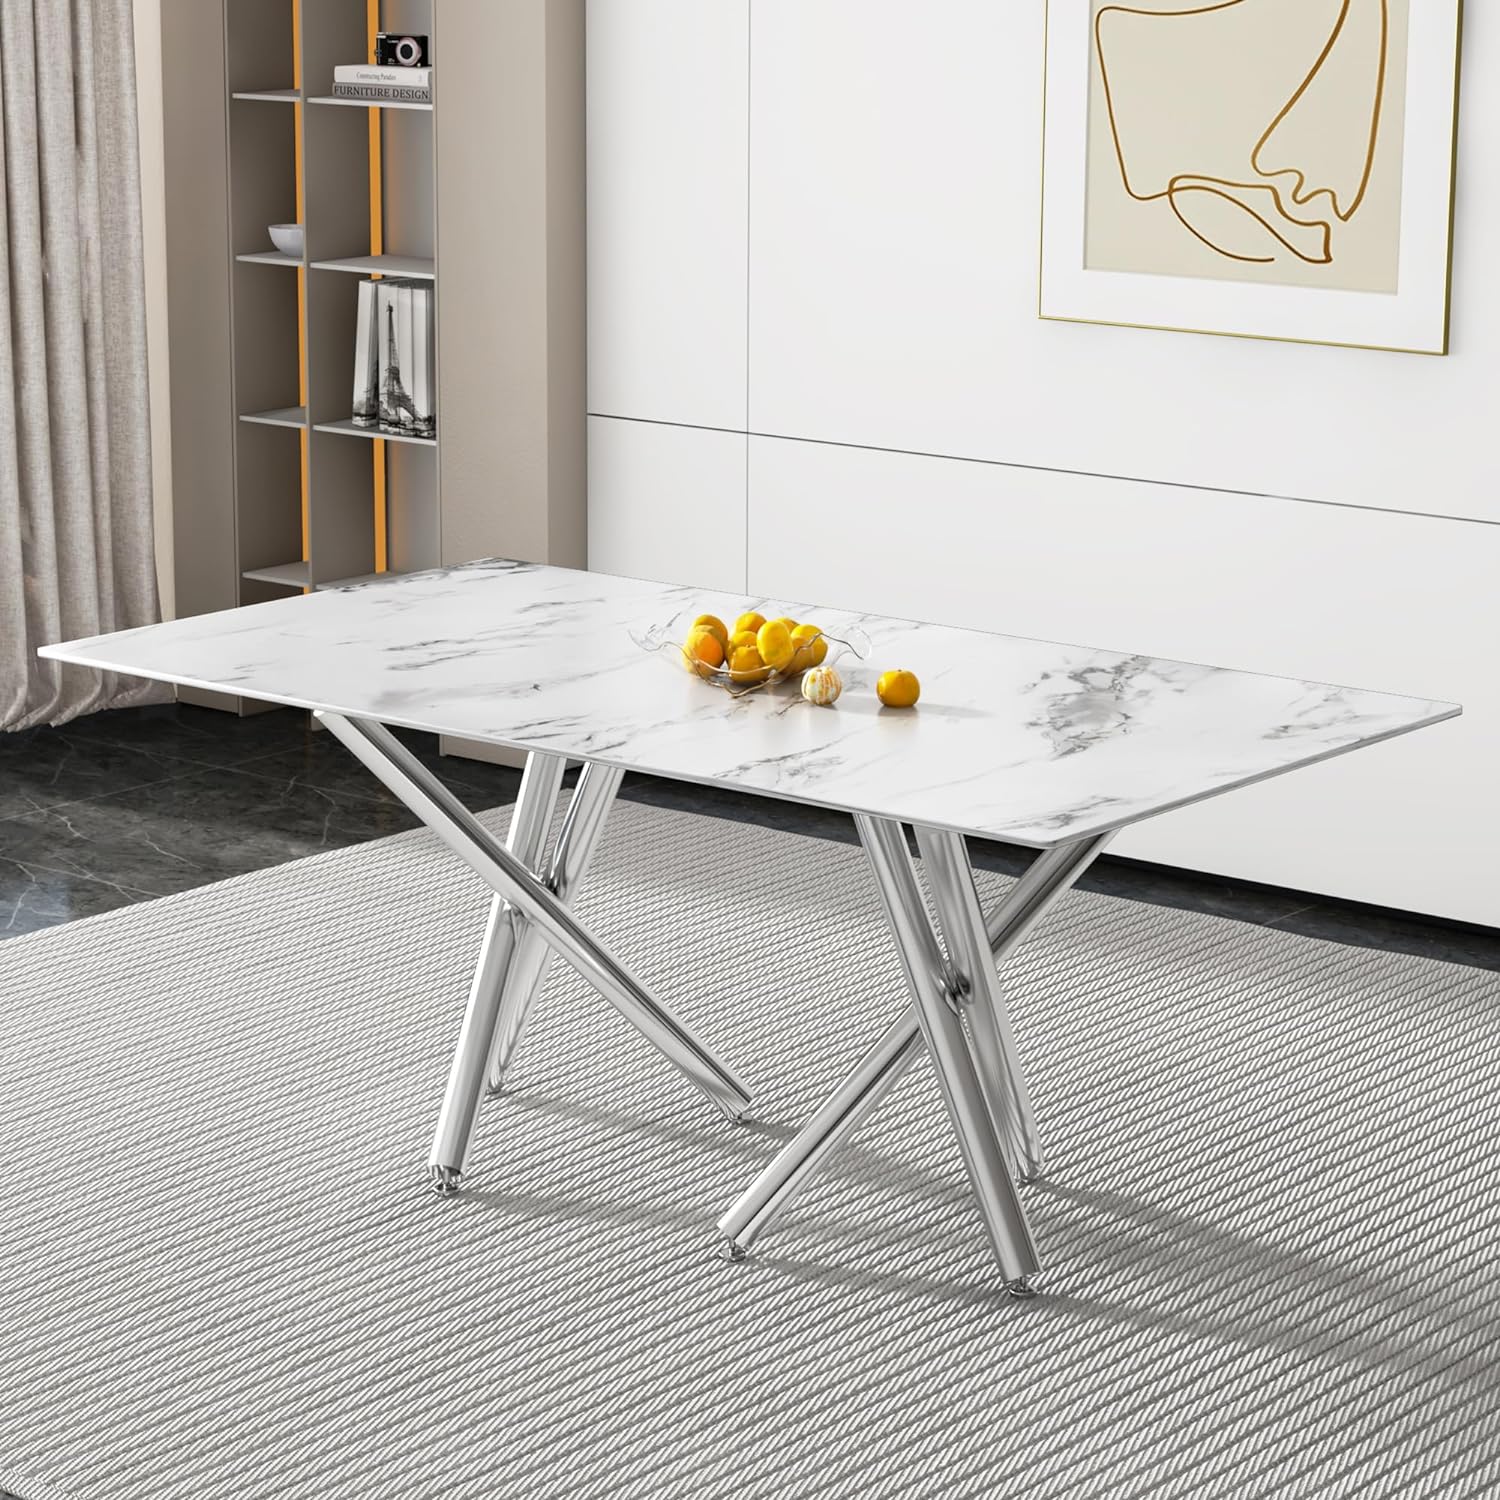 WILLIAMSPACE 70.9 Glass Dining Table with Imitation Marble Desktop and Silver Metal Legs, Modern Kitchen Dining Table for 6-8 Person, Rectangular Dining Table for Dining Room Living Room - White